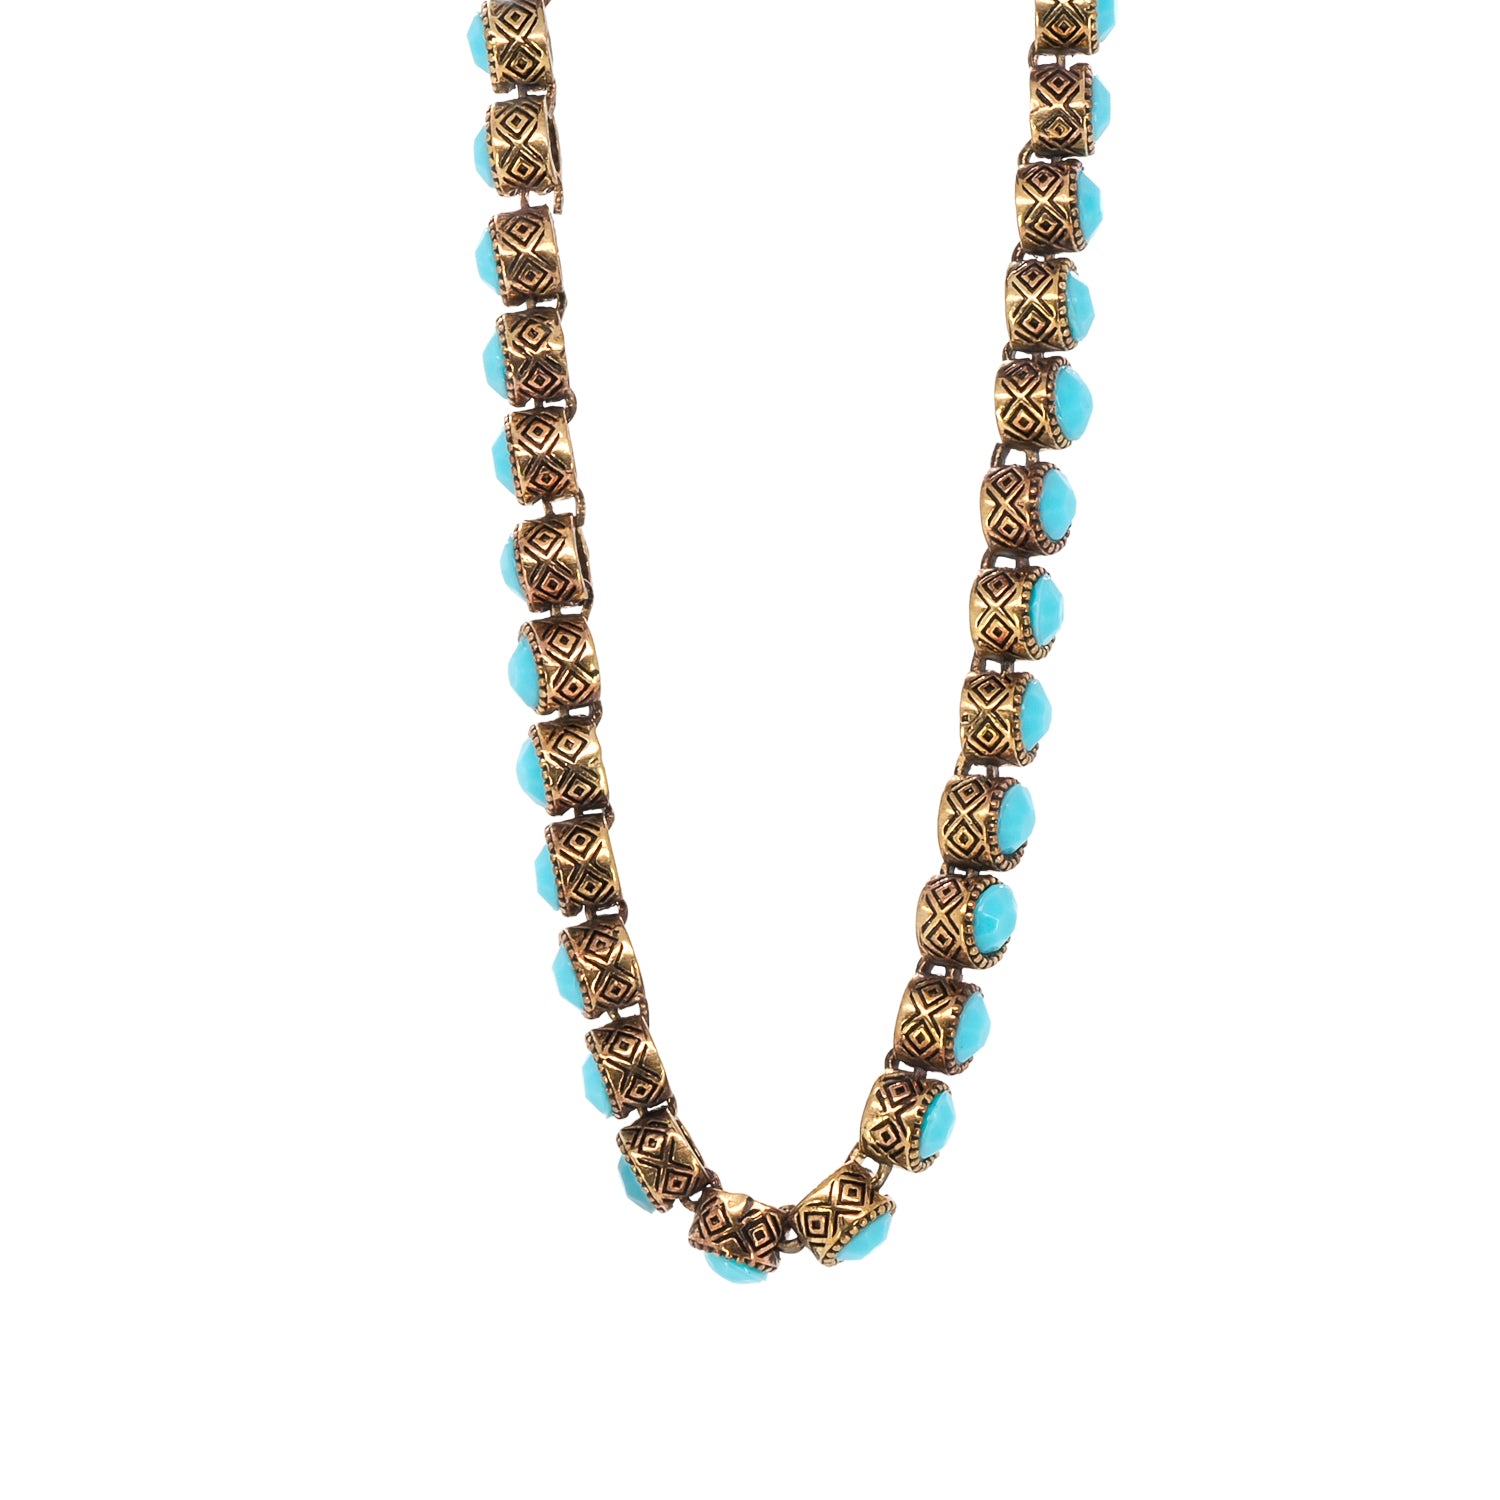 Experience the positive influence of turquoise with this stylish handmade necklace, designed to balance and purify your energy.